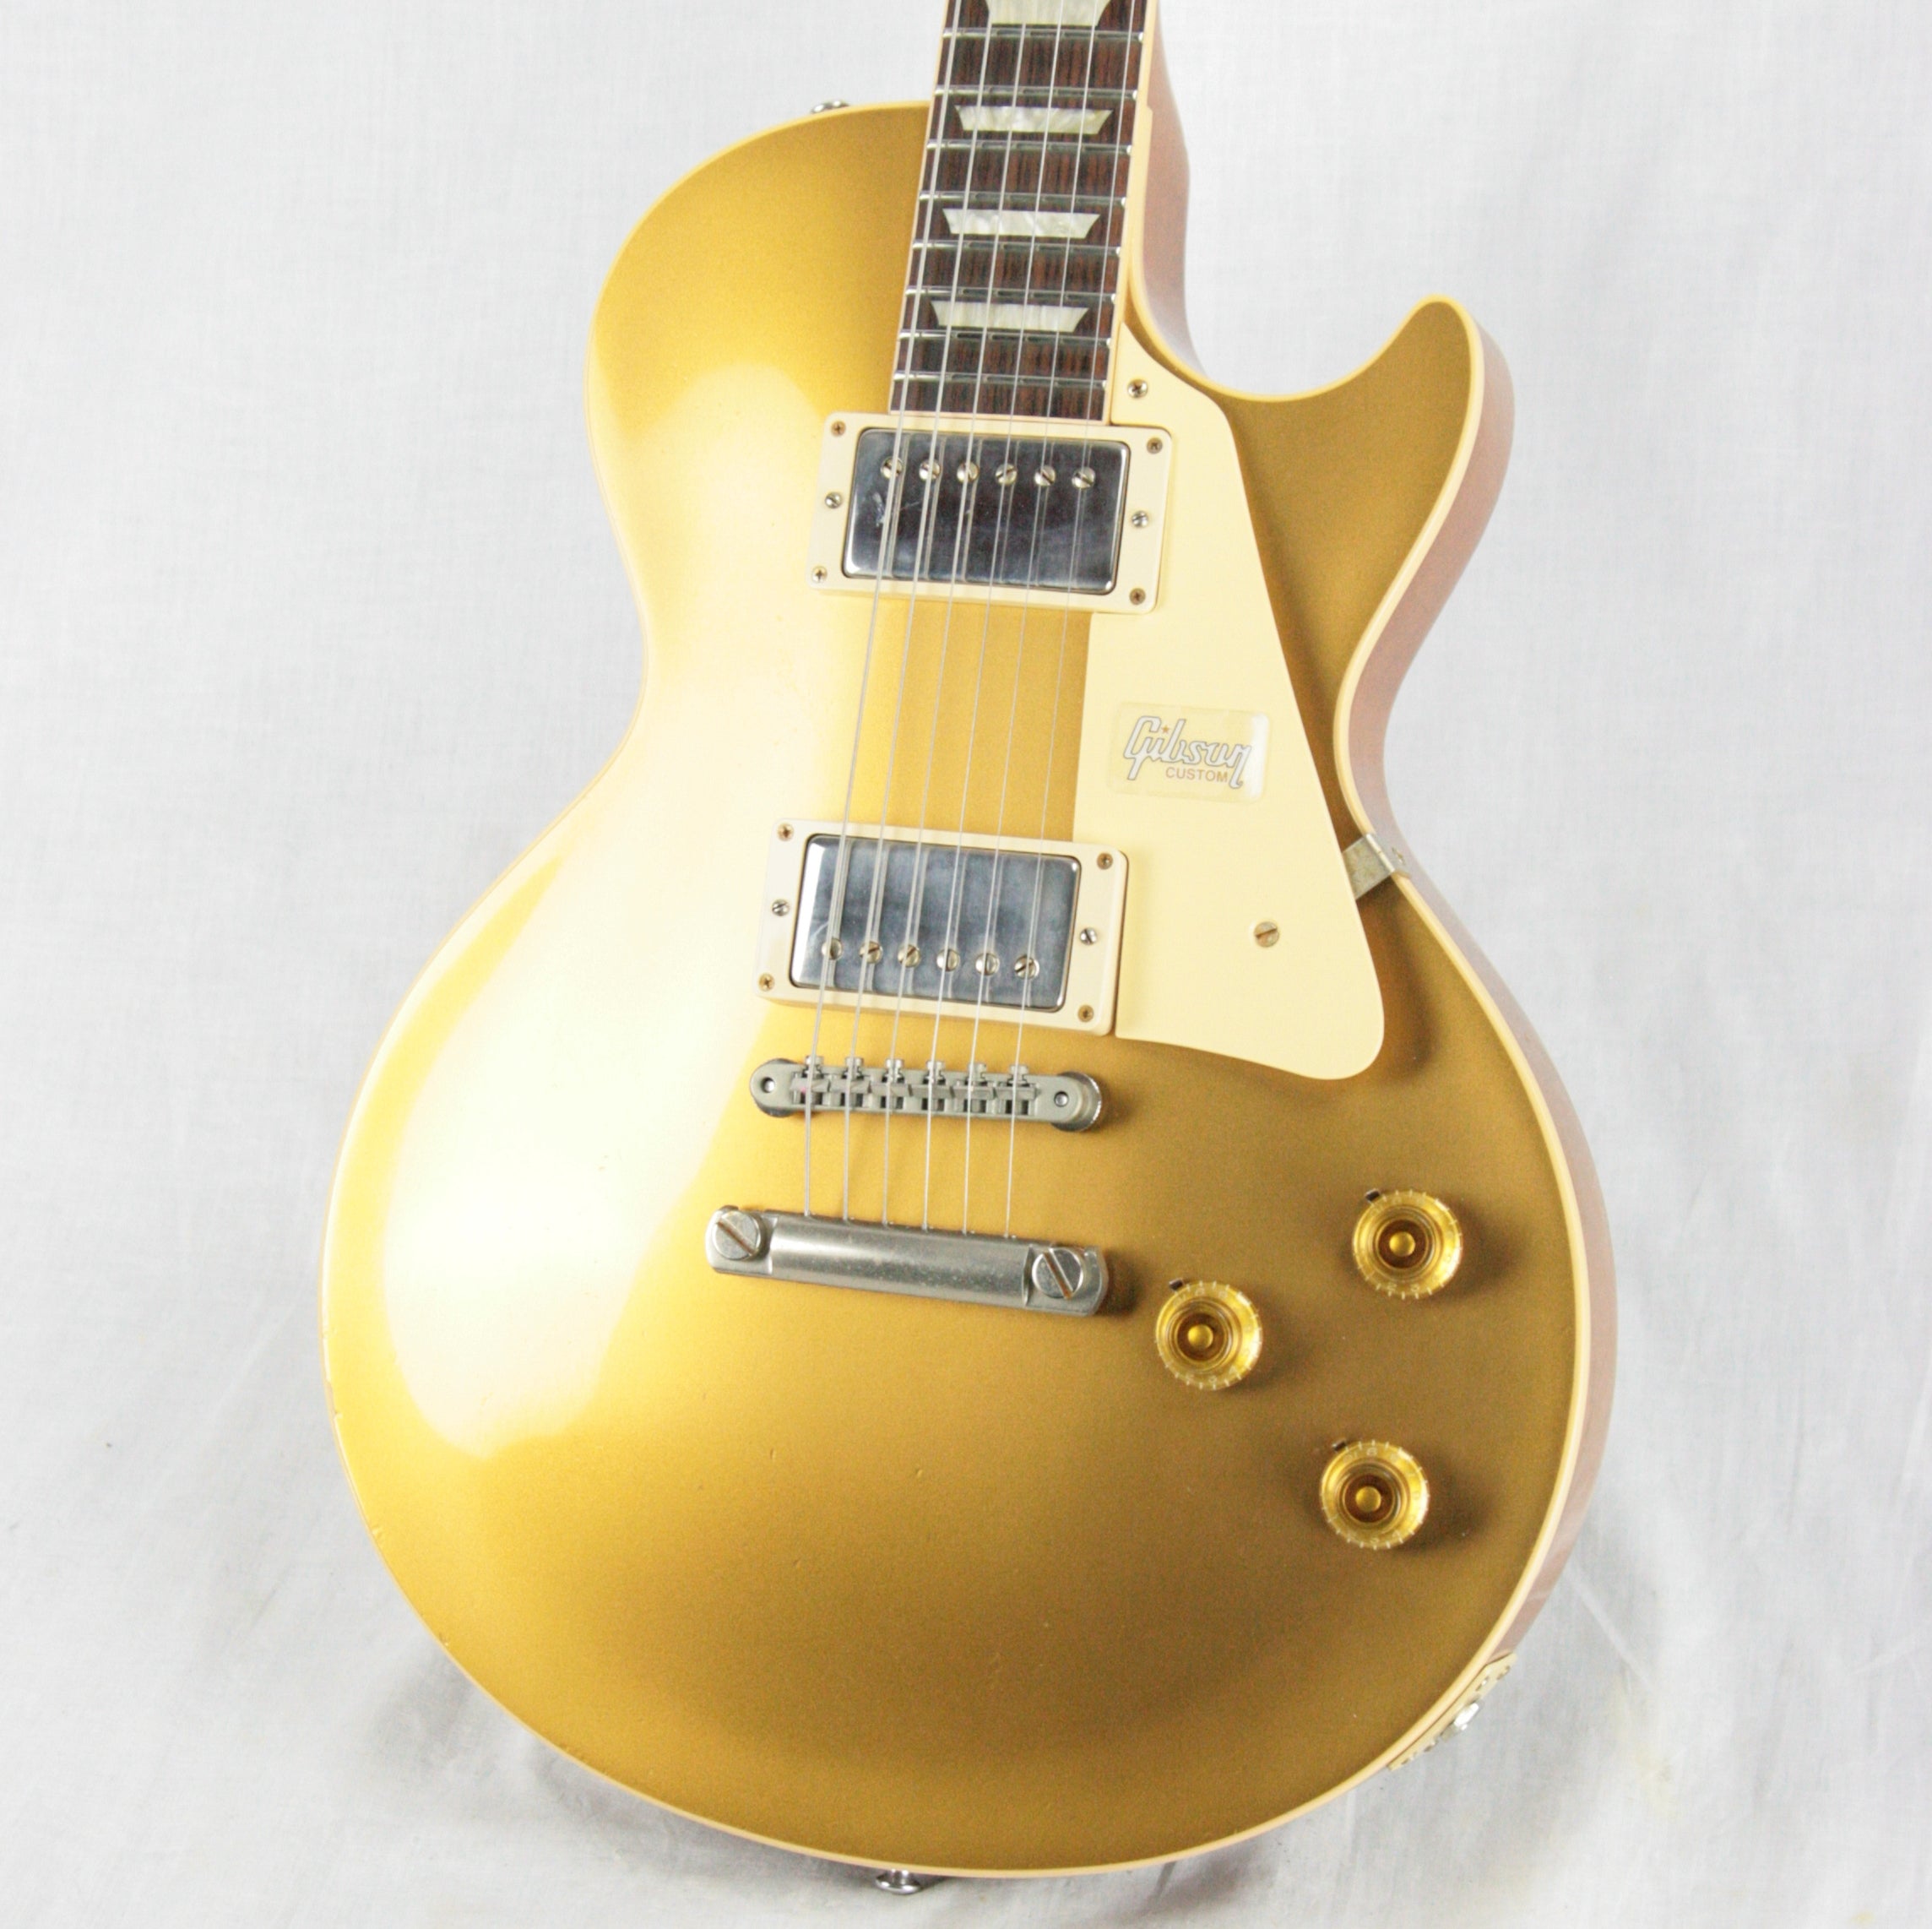 *SOLD*  2018 Gibson 1957 AGED Goldtop Les Paul 3-KNOB Reissue! R7 57 Bigsby! Billy Gibbons